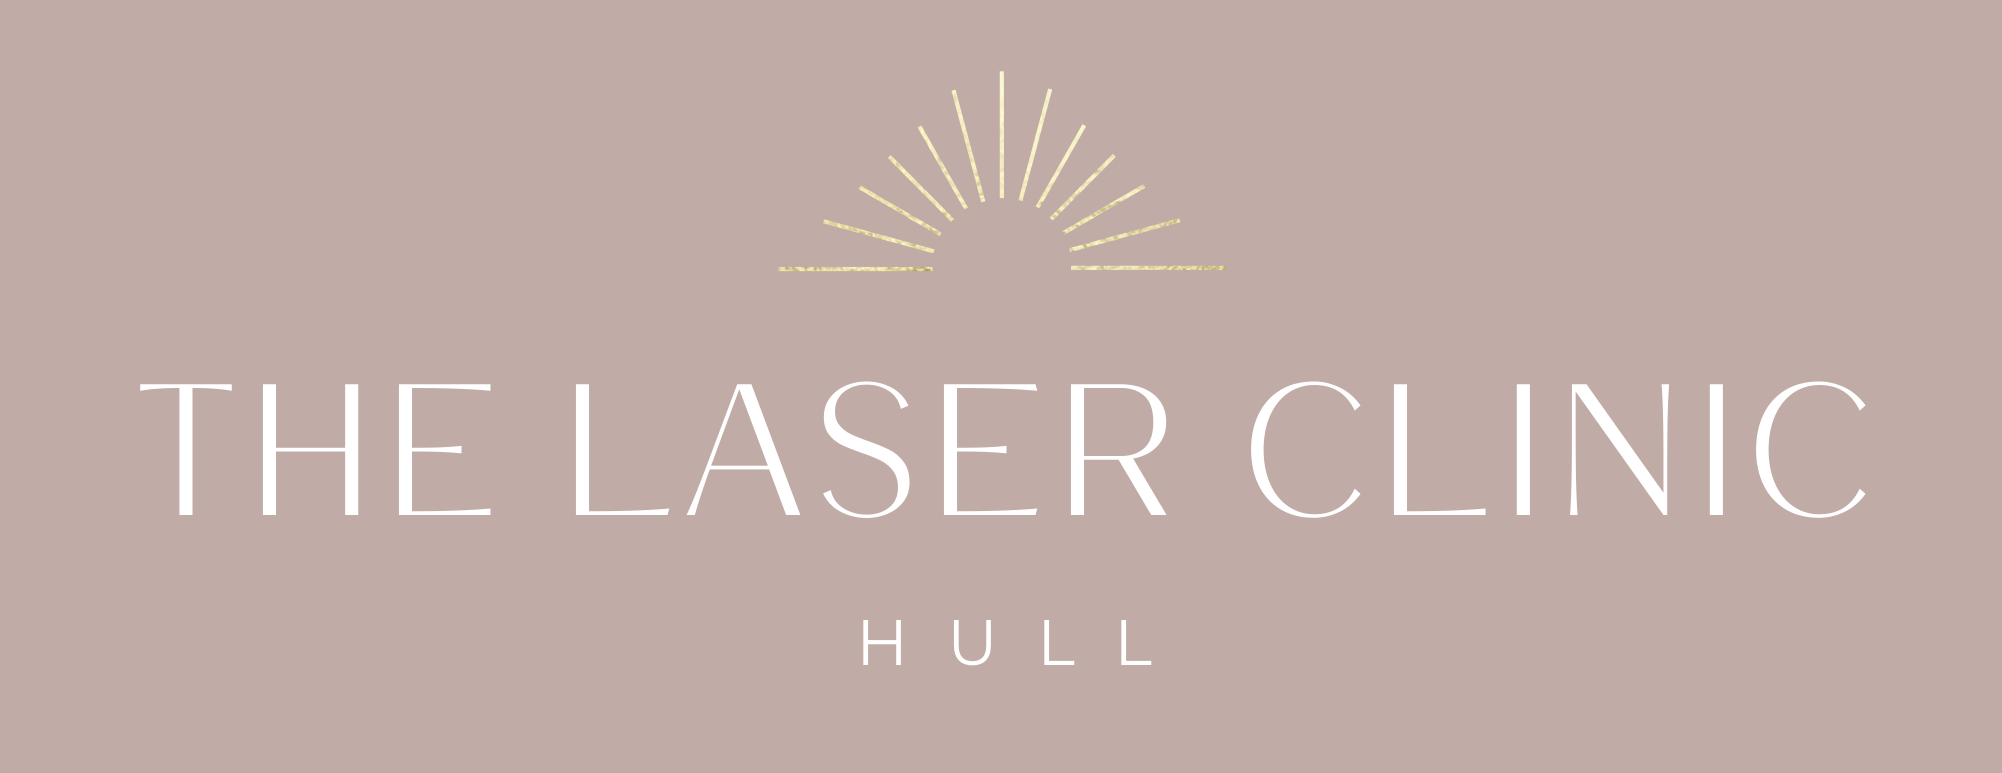 The Laser Clinic Hull